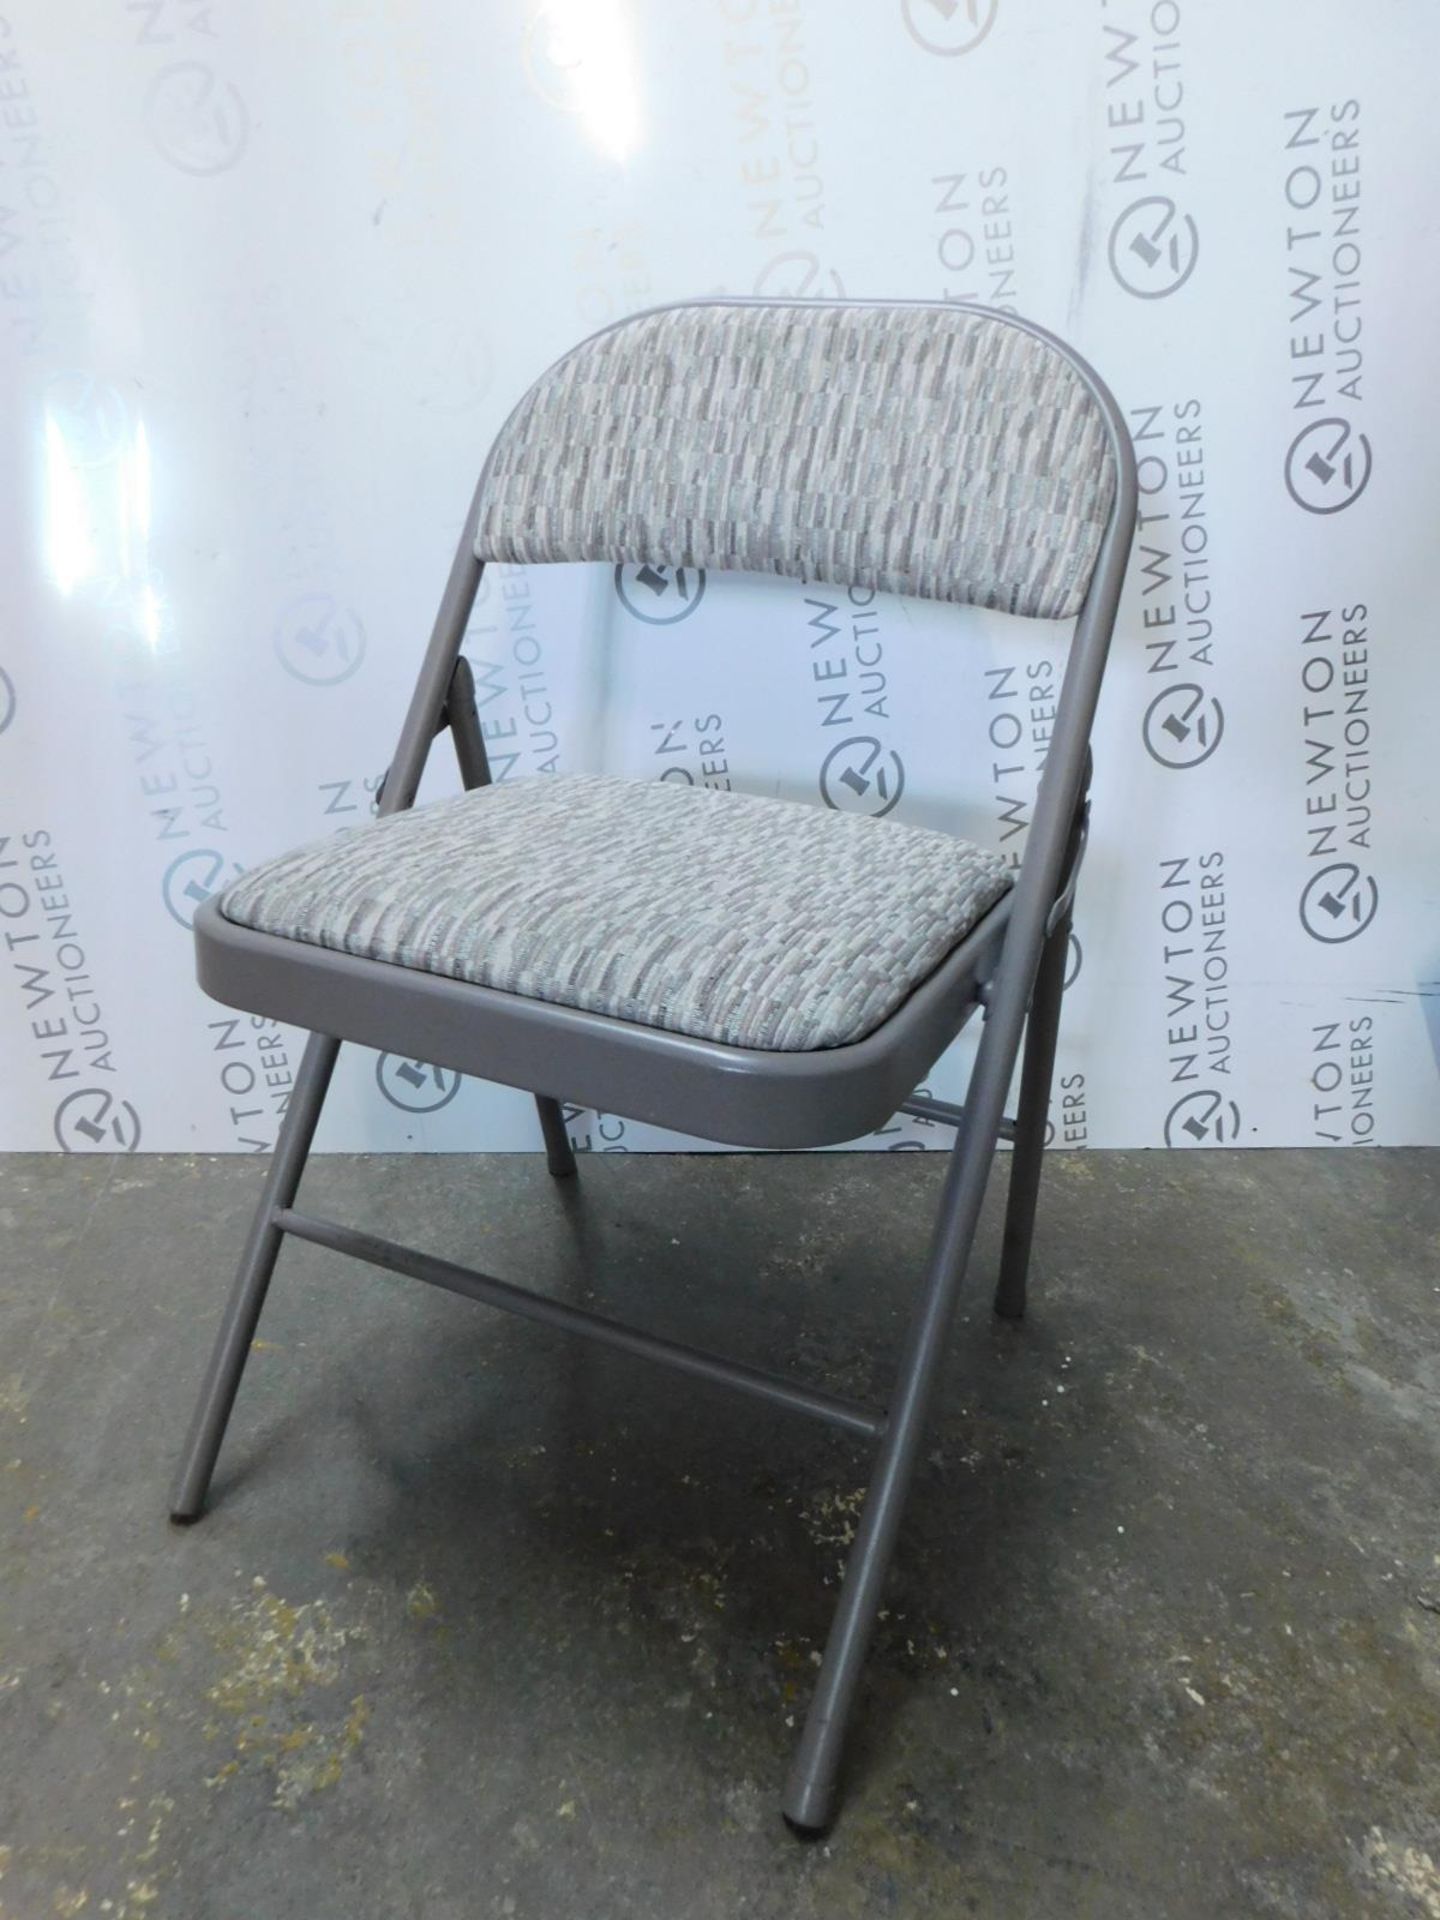 1 MECO DELUXE PADDED STEEL FABRIC FOLDING GUEST CHAIR RRP Â£29.99 - Image 2 of 2